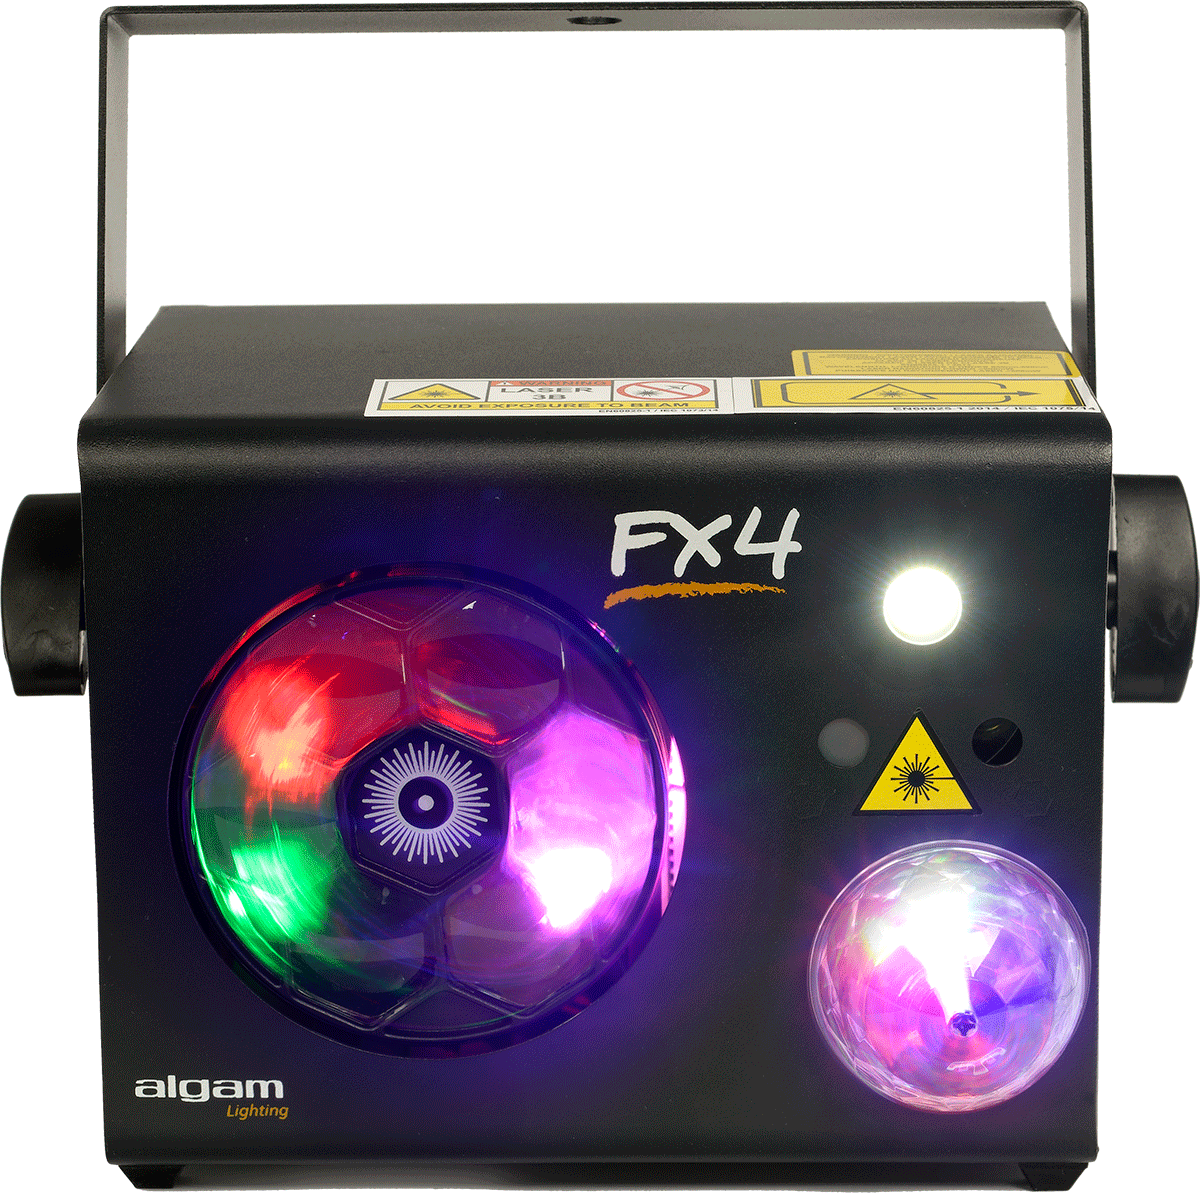 FX-4 all-in-one animation effect